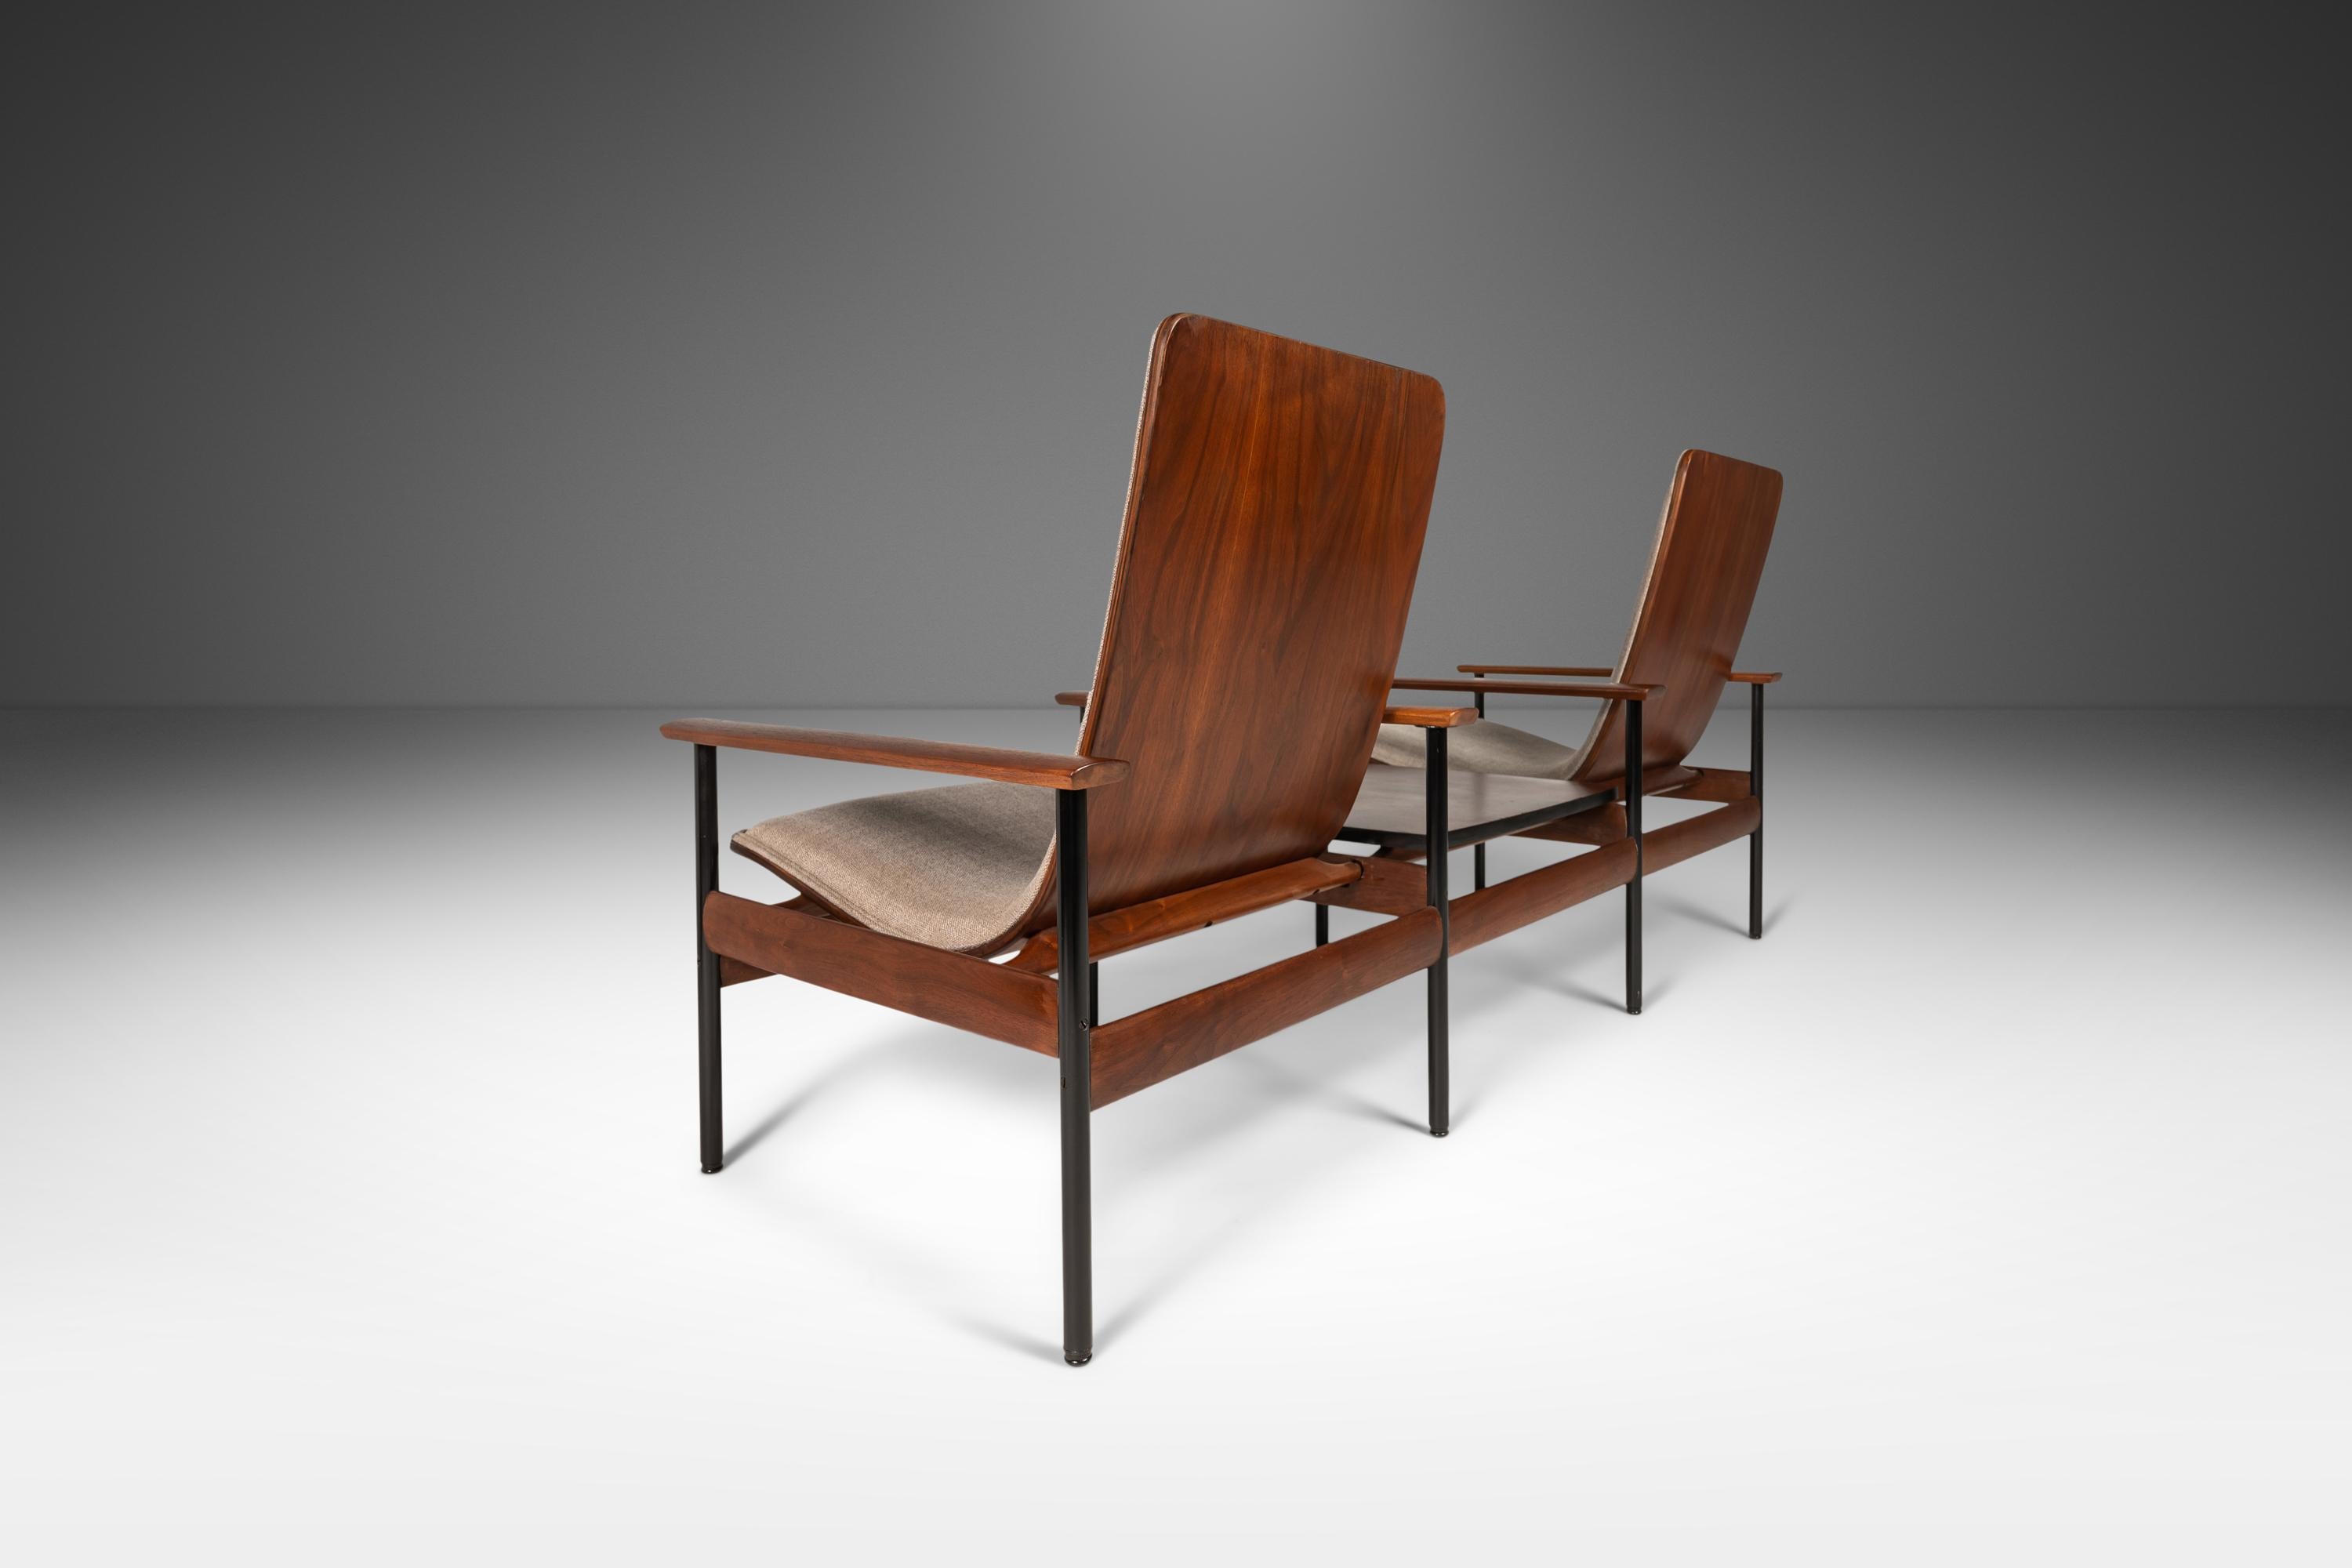 Two Seat Bench with End Table Attributed to Sven Ivar Dysthe, Norway, c. 1960s 6